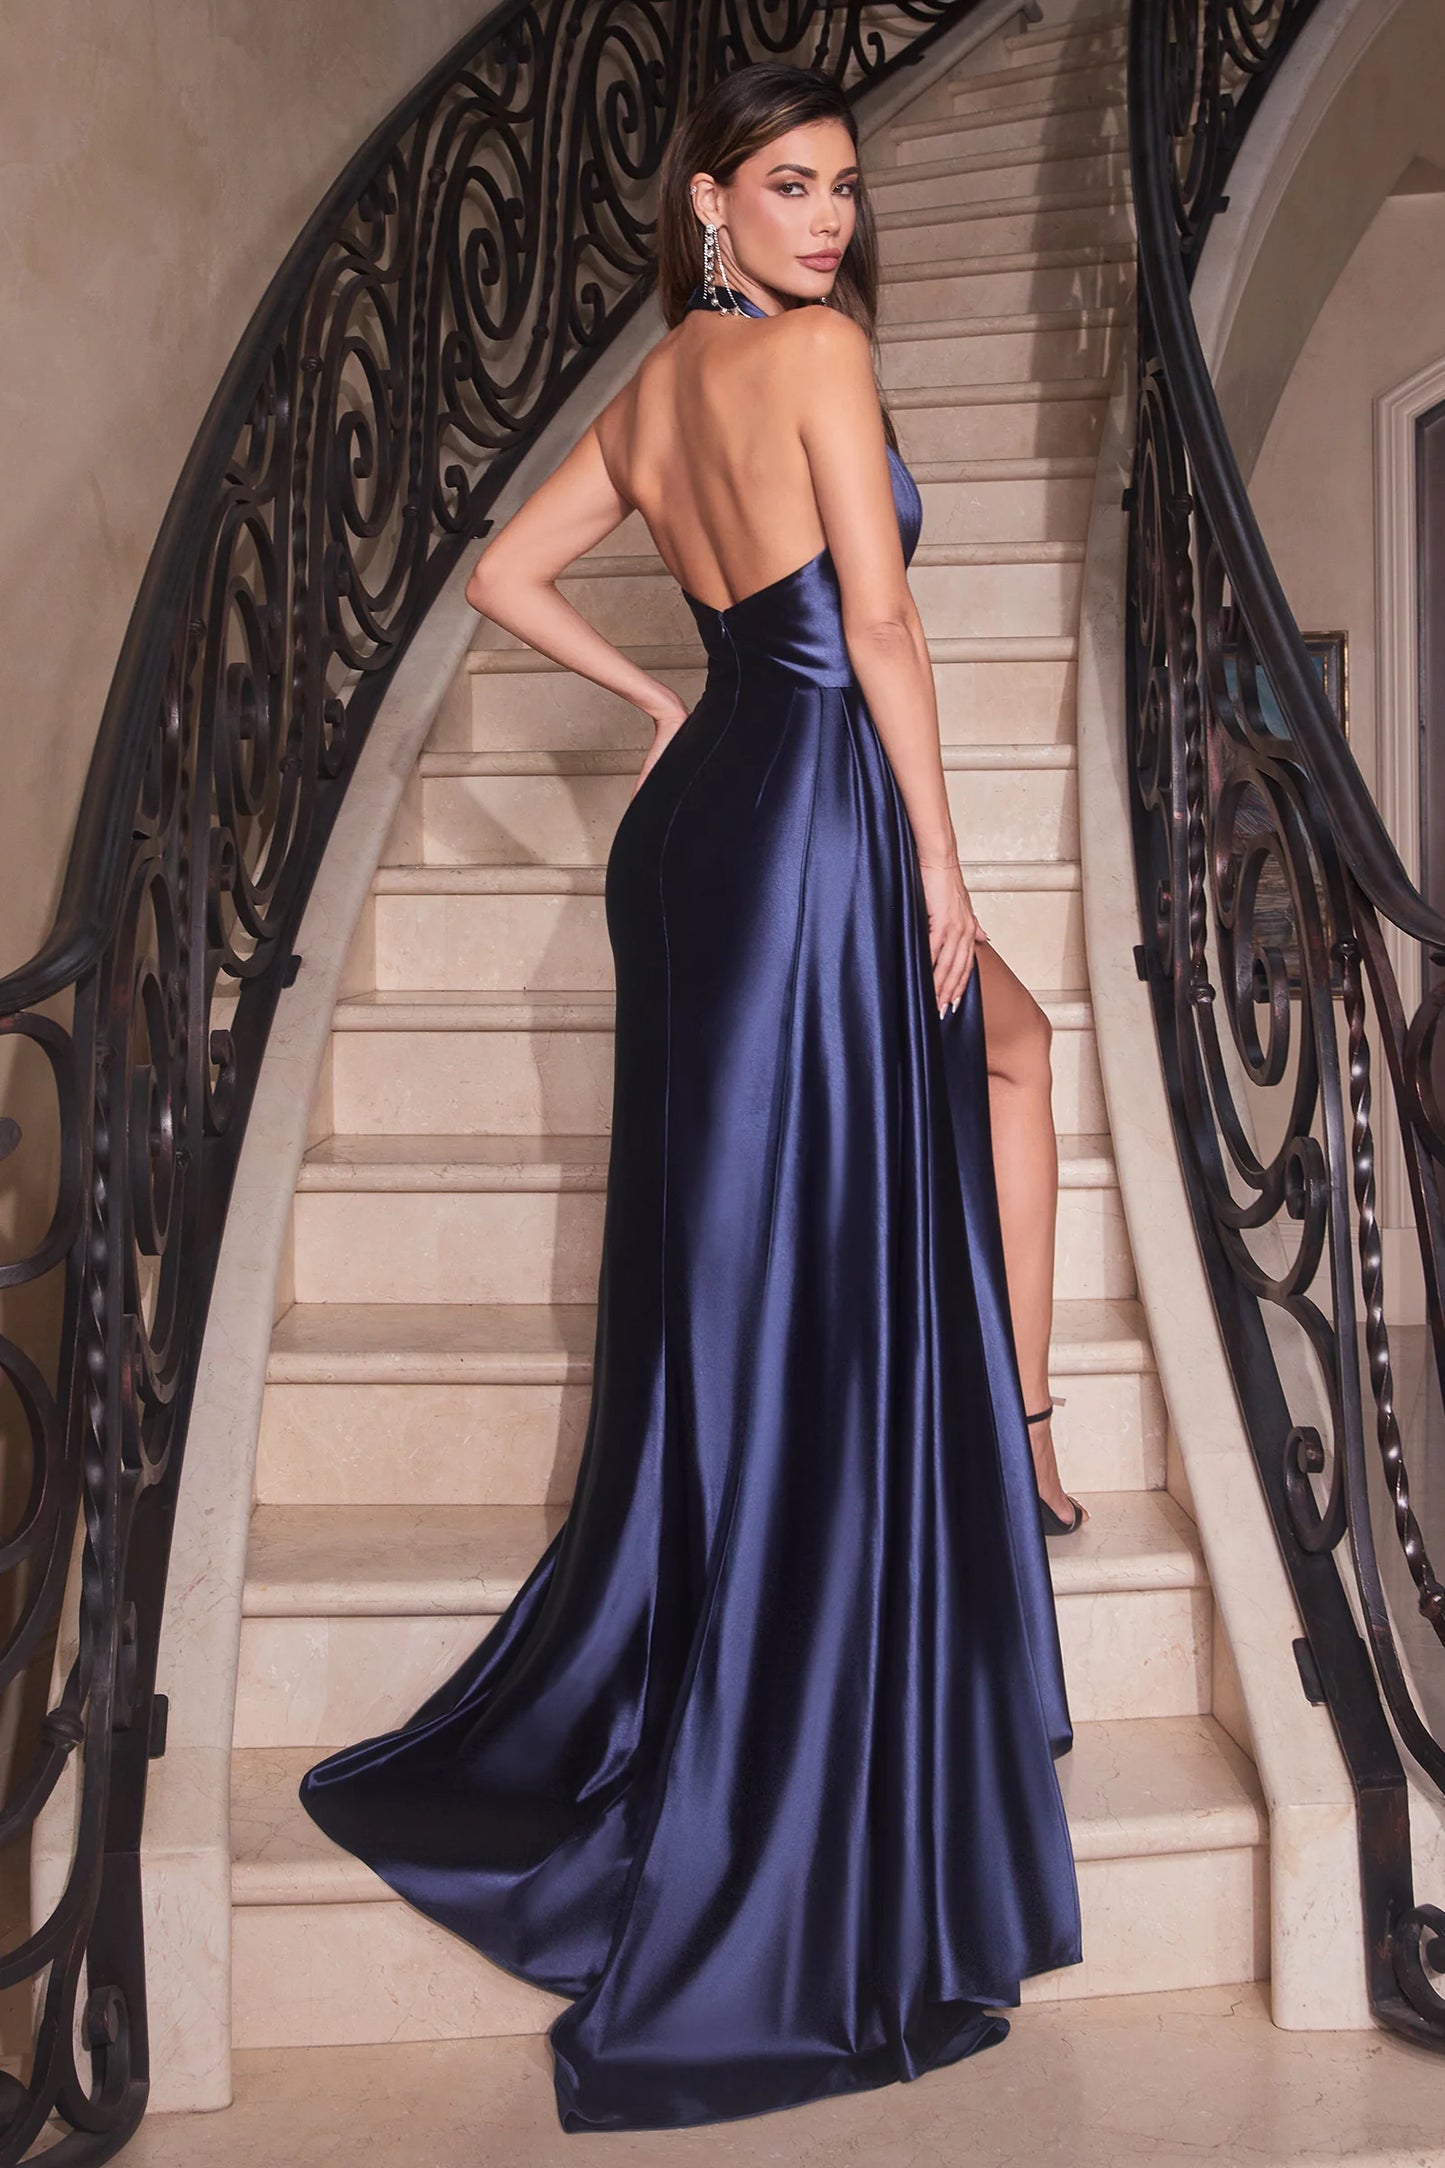 Ladivine CH0789C Halter Satin Prom/Evening Dress - An elegant gown featuring a halter neckline, leg slit, gathered waistline, side sash, and crafted from luxurious satin material for both style and comfort.